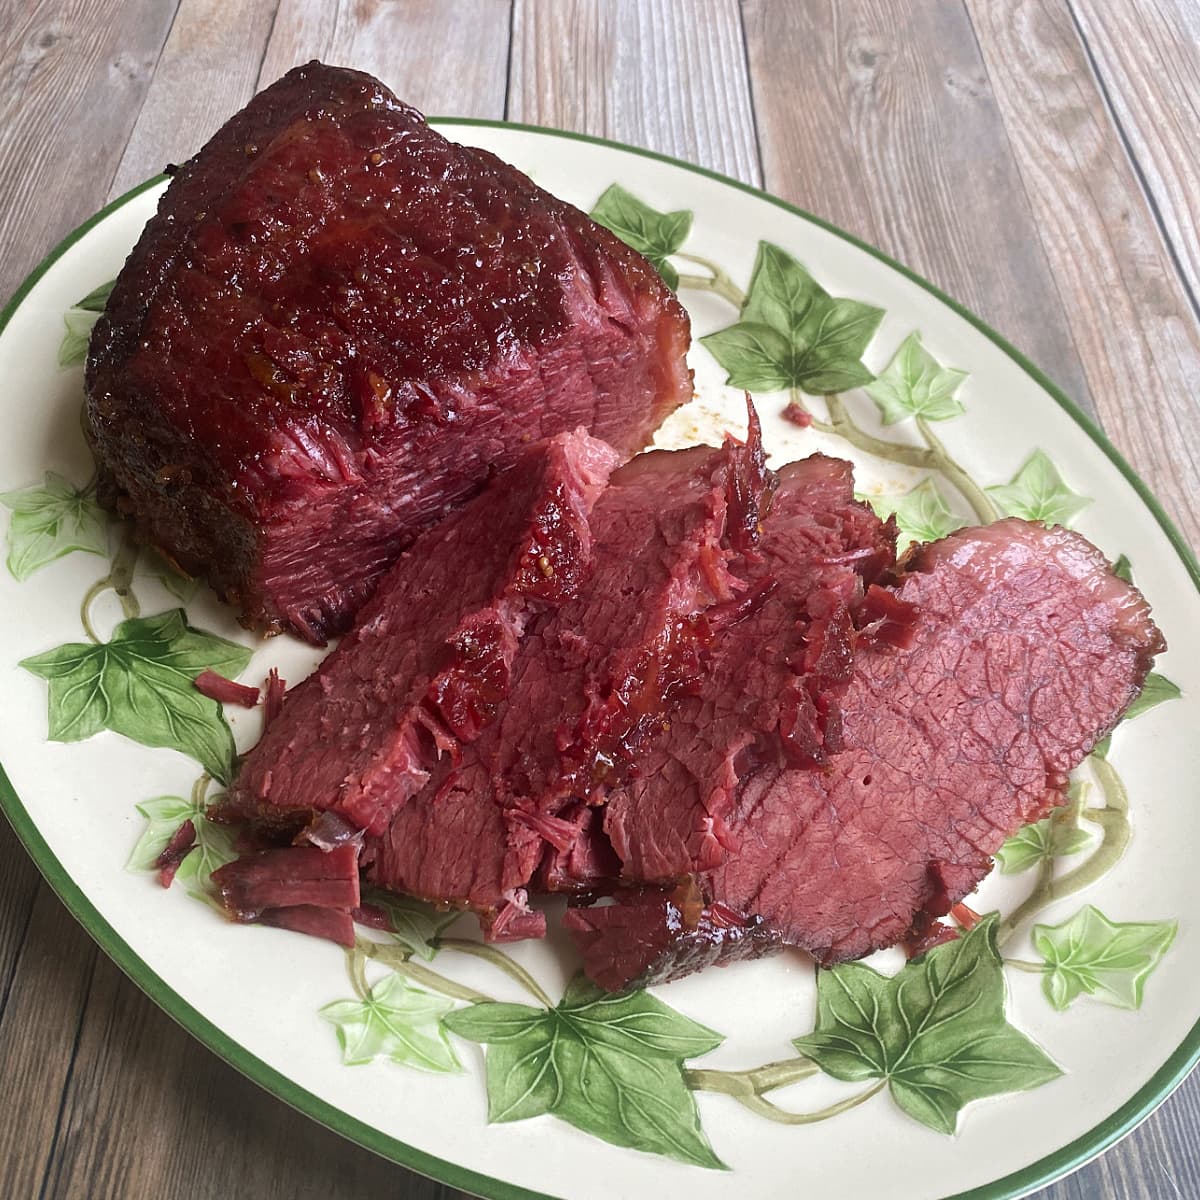 Corned beef prepared and sliced on Ivy patterned oval serving platter.